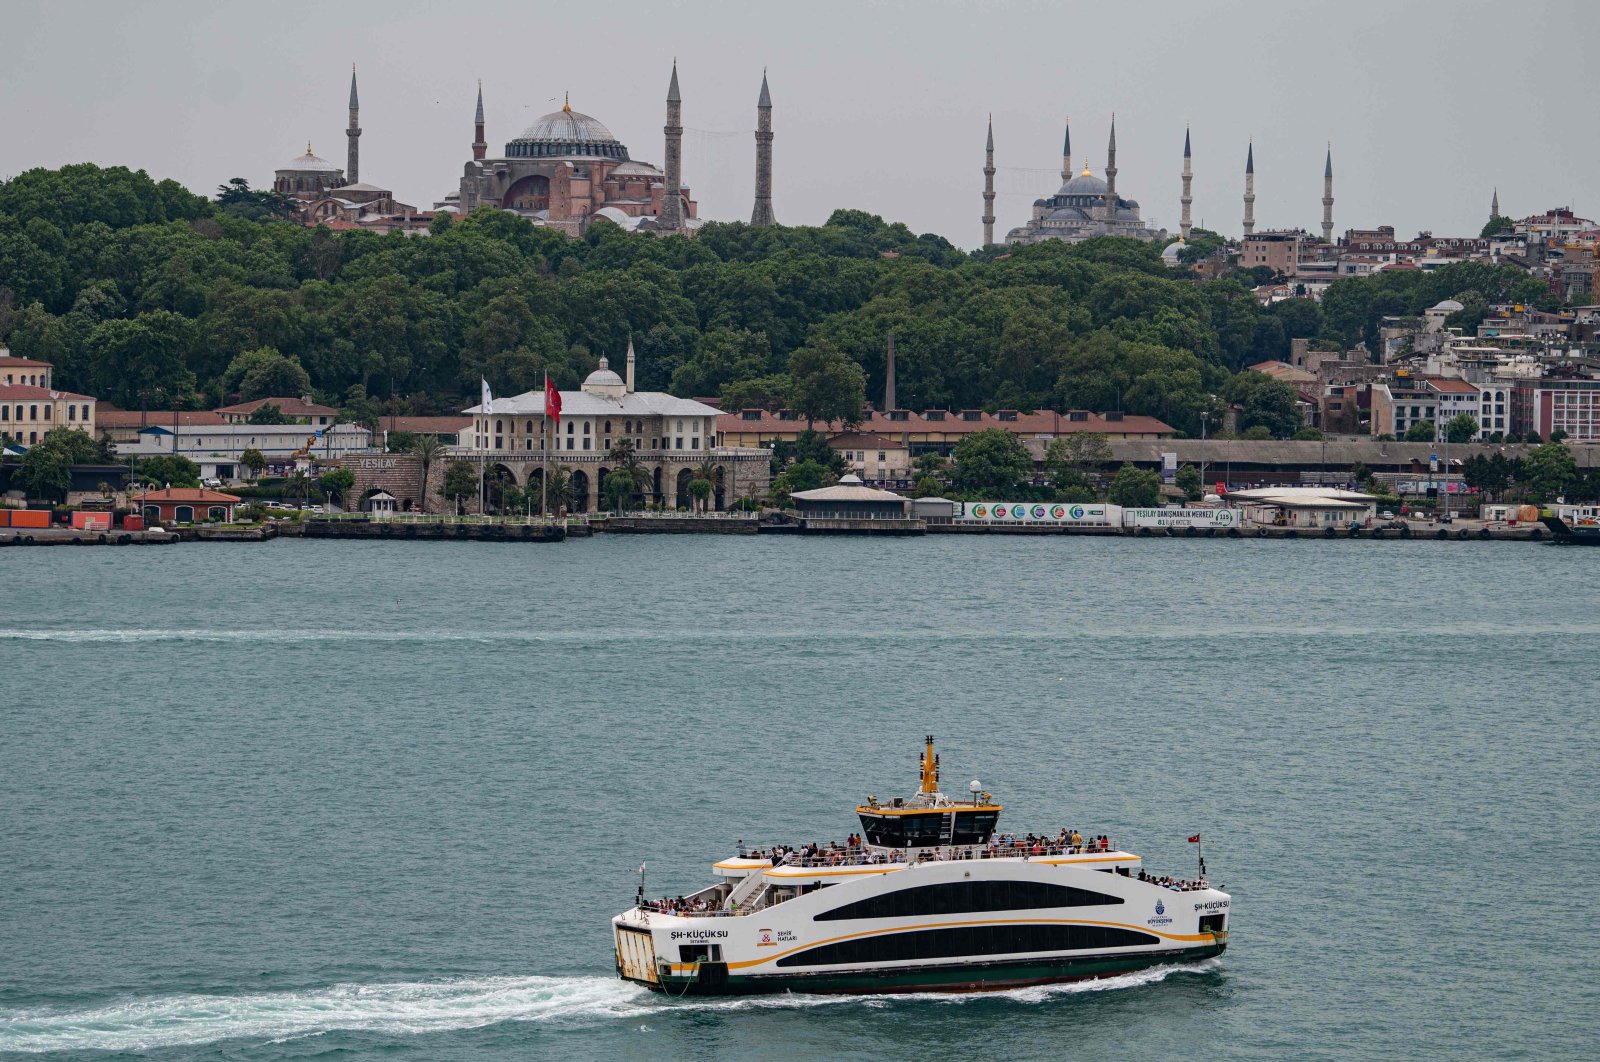 A view from the Costa Venezia cruise ship moored in Istanbul, Turkey, June 6, 2022. (AFP)